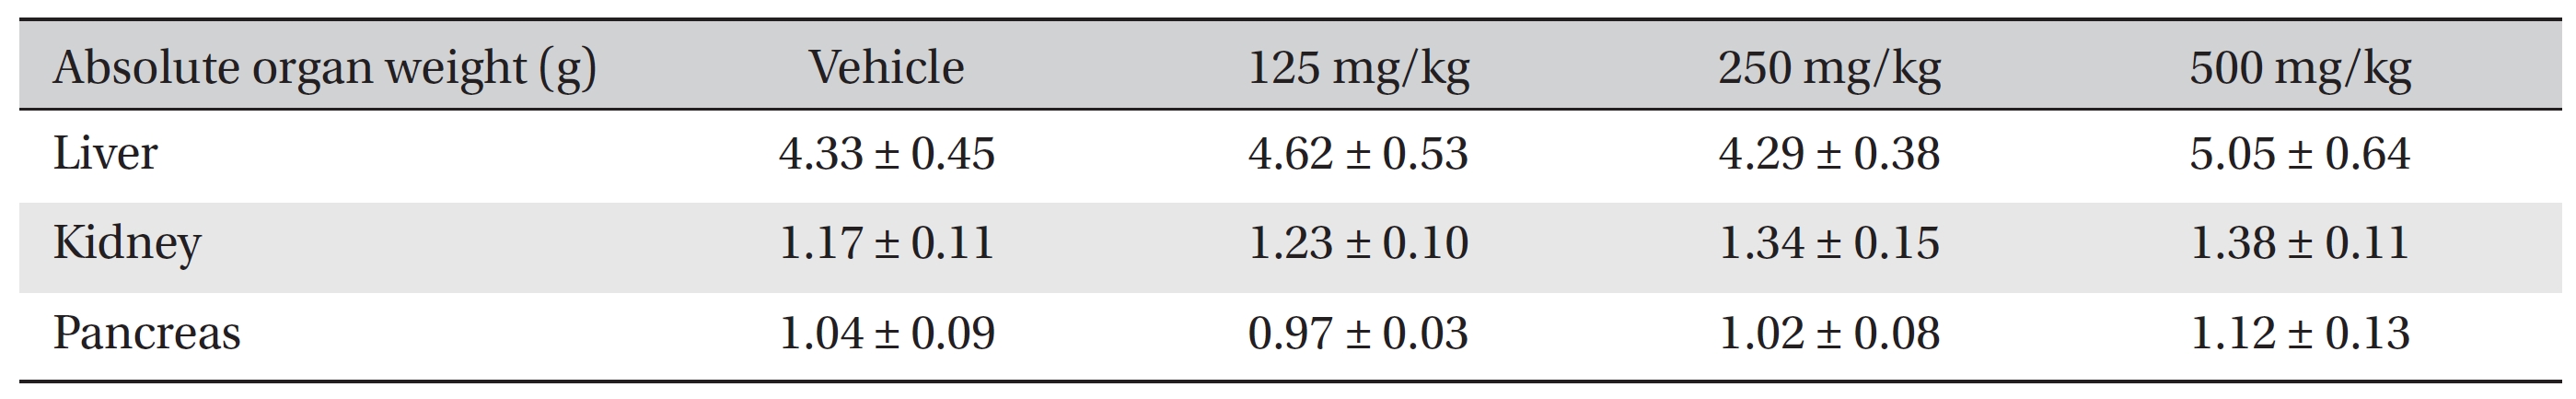 Organ weights of rats in the sub-acute toxicity study for the control group and the groups treated with different doses of the test
extract of W. volubilis